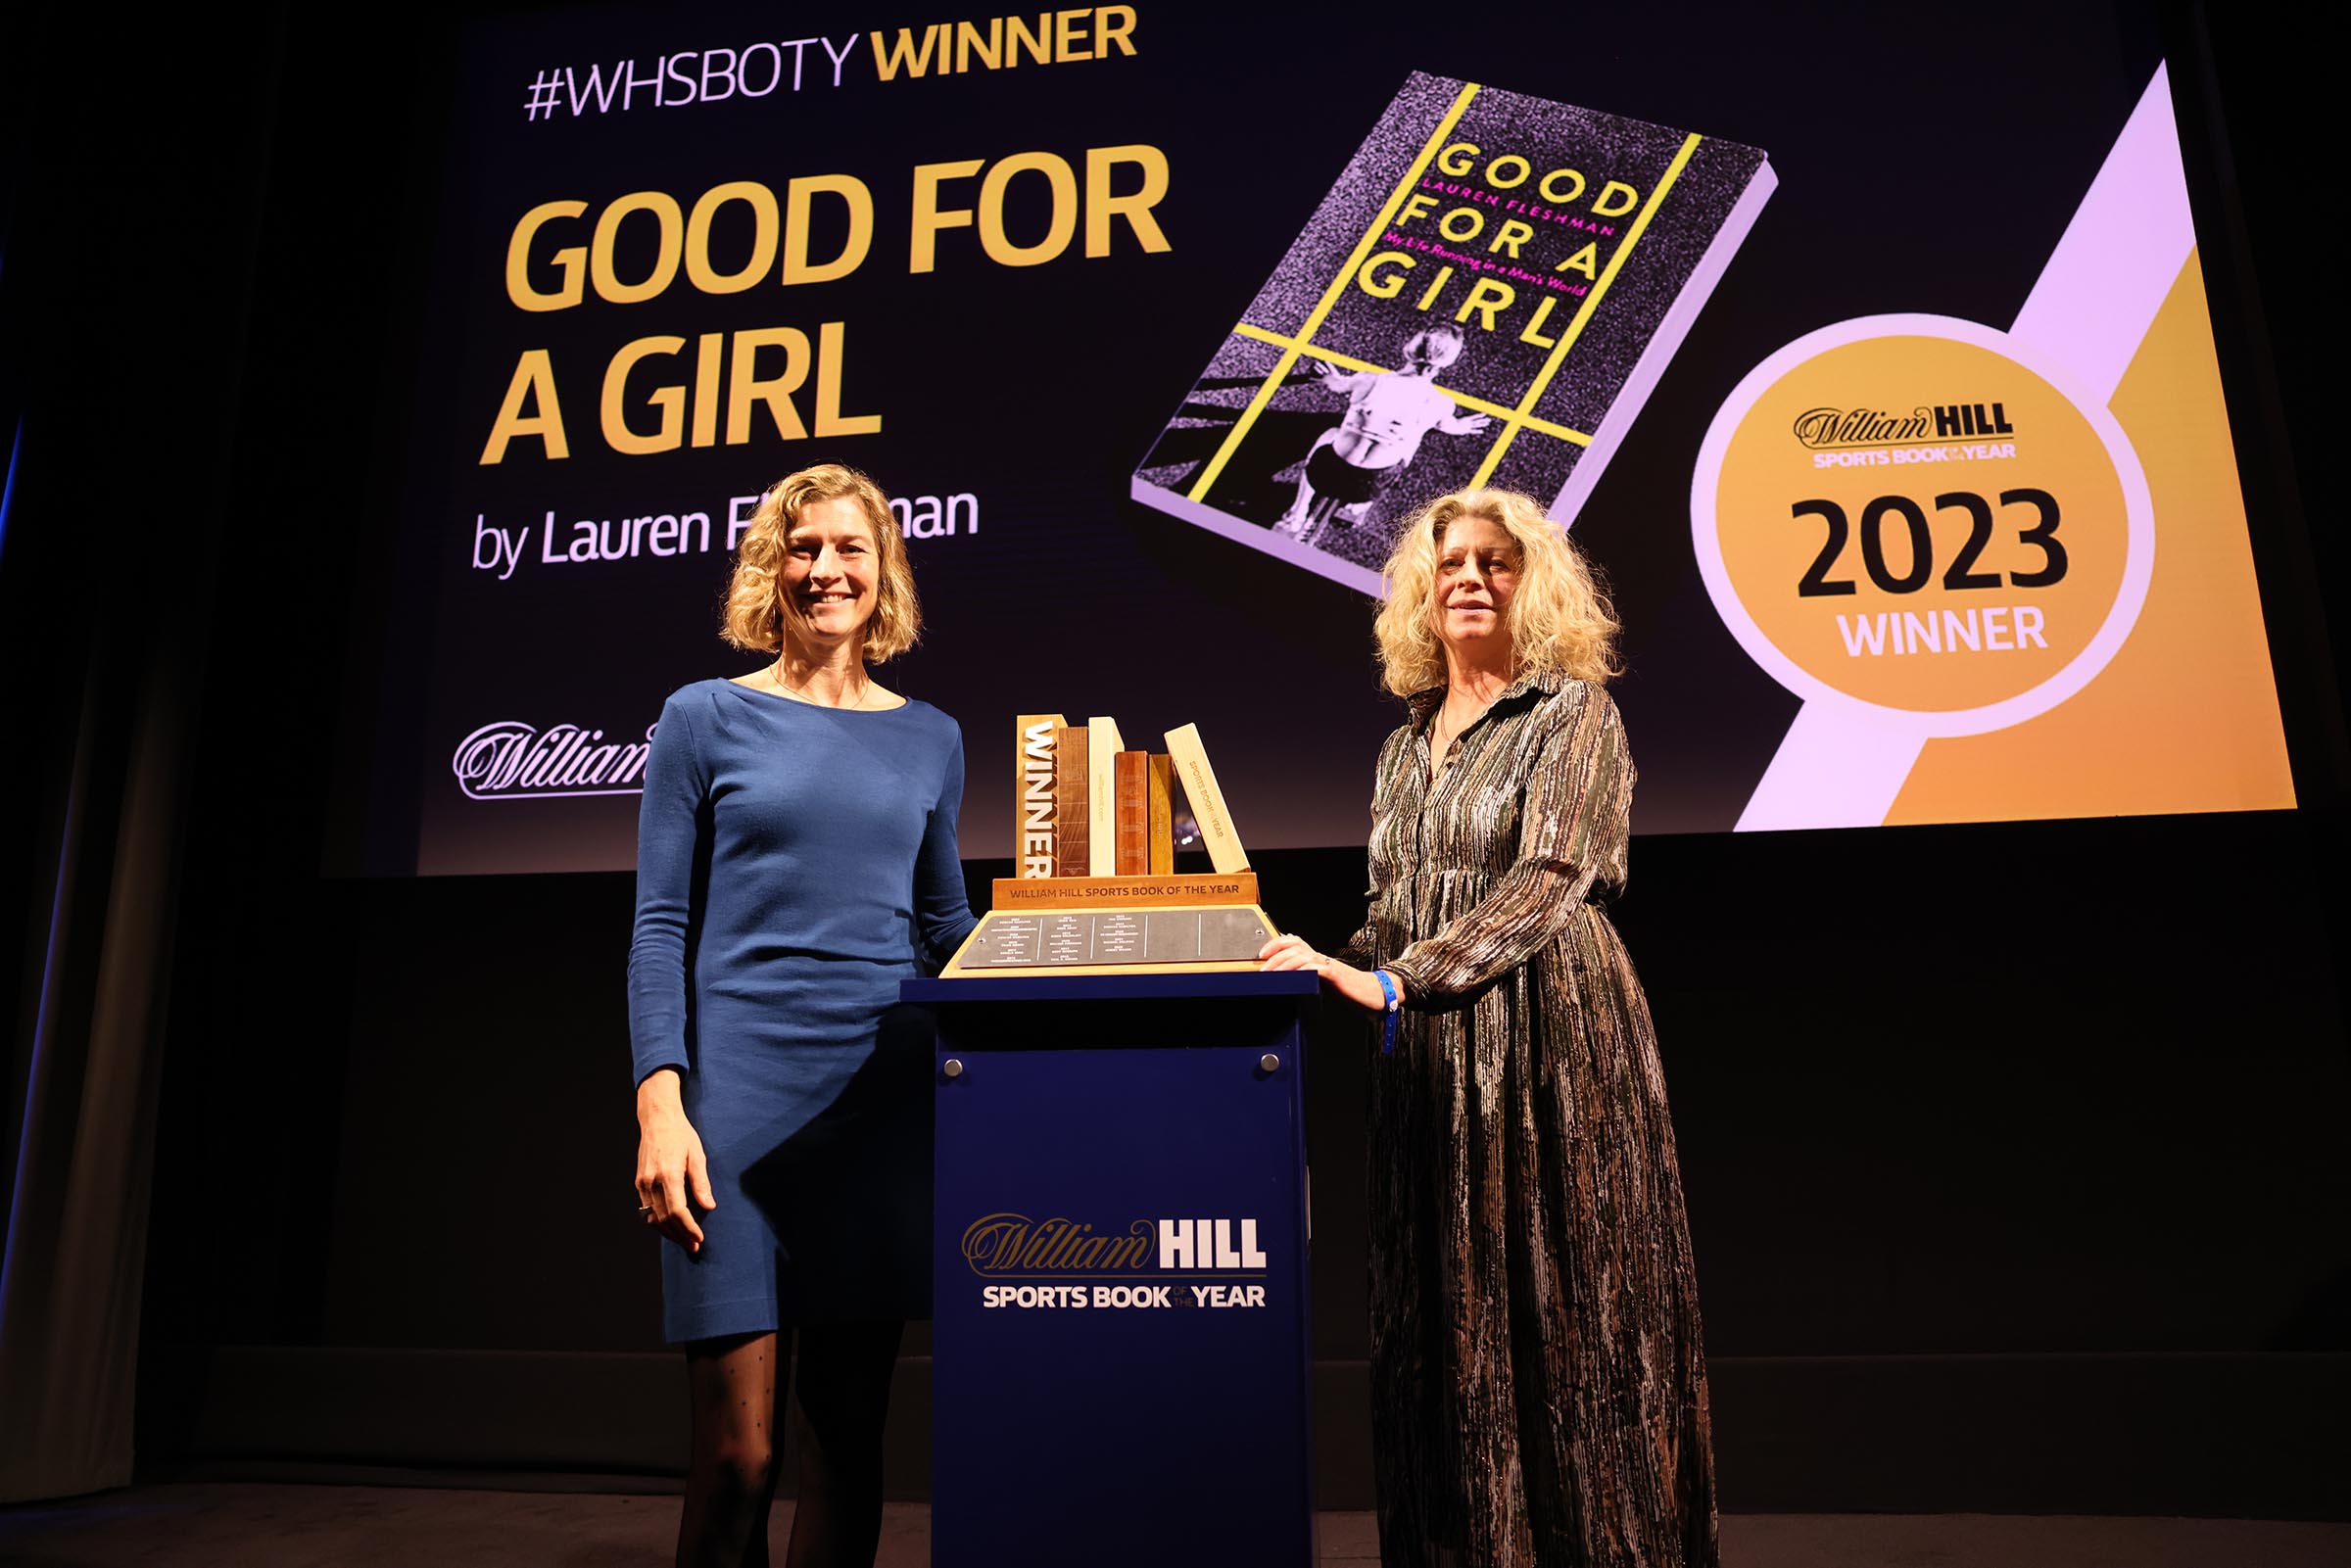 from-track-to-triumph:-ex-professional-runner-lauren-fleshman’s-good-for-a-girl-wins-best-sports-book-of-2023